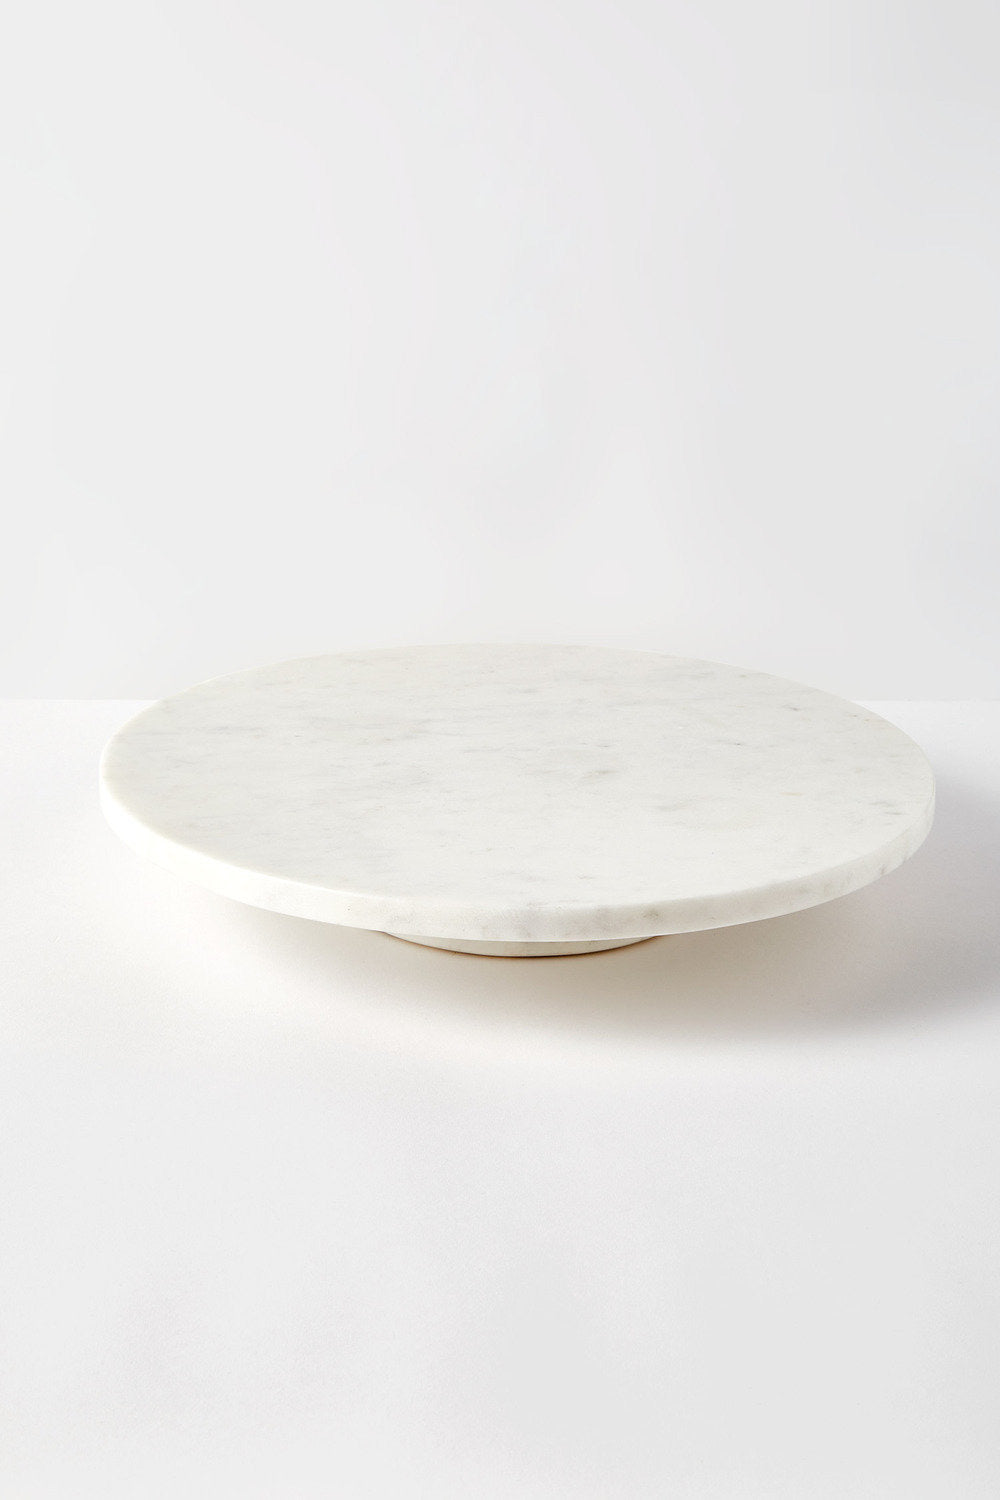 MARBLE LAZY SUZAN - Mabrook Hotel Supplies